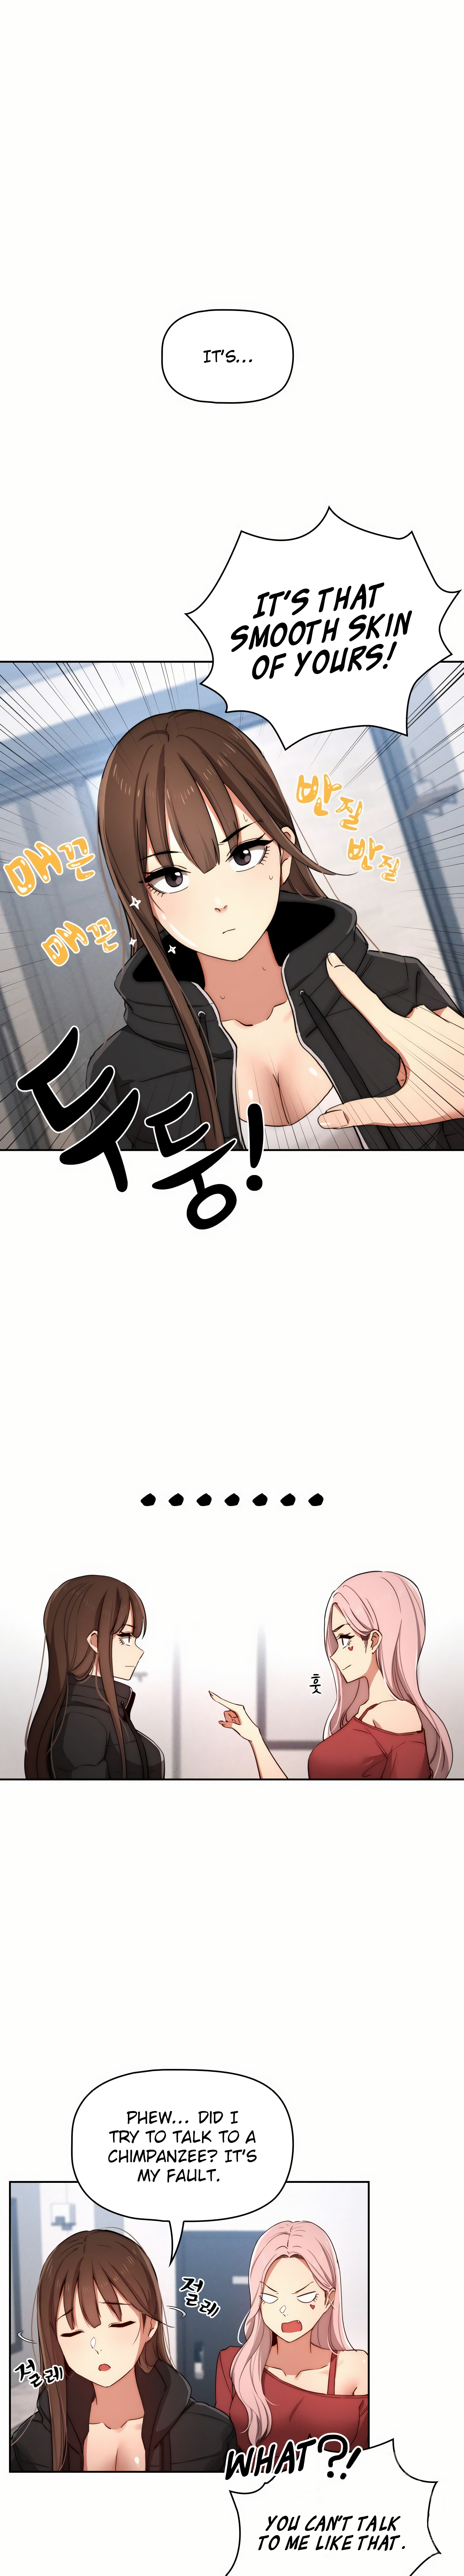 private-tutoring-in-these-difficult-times-chap-34-4